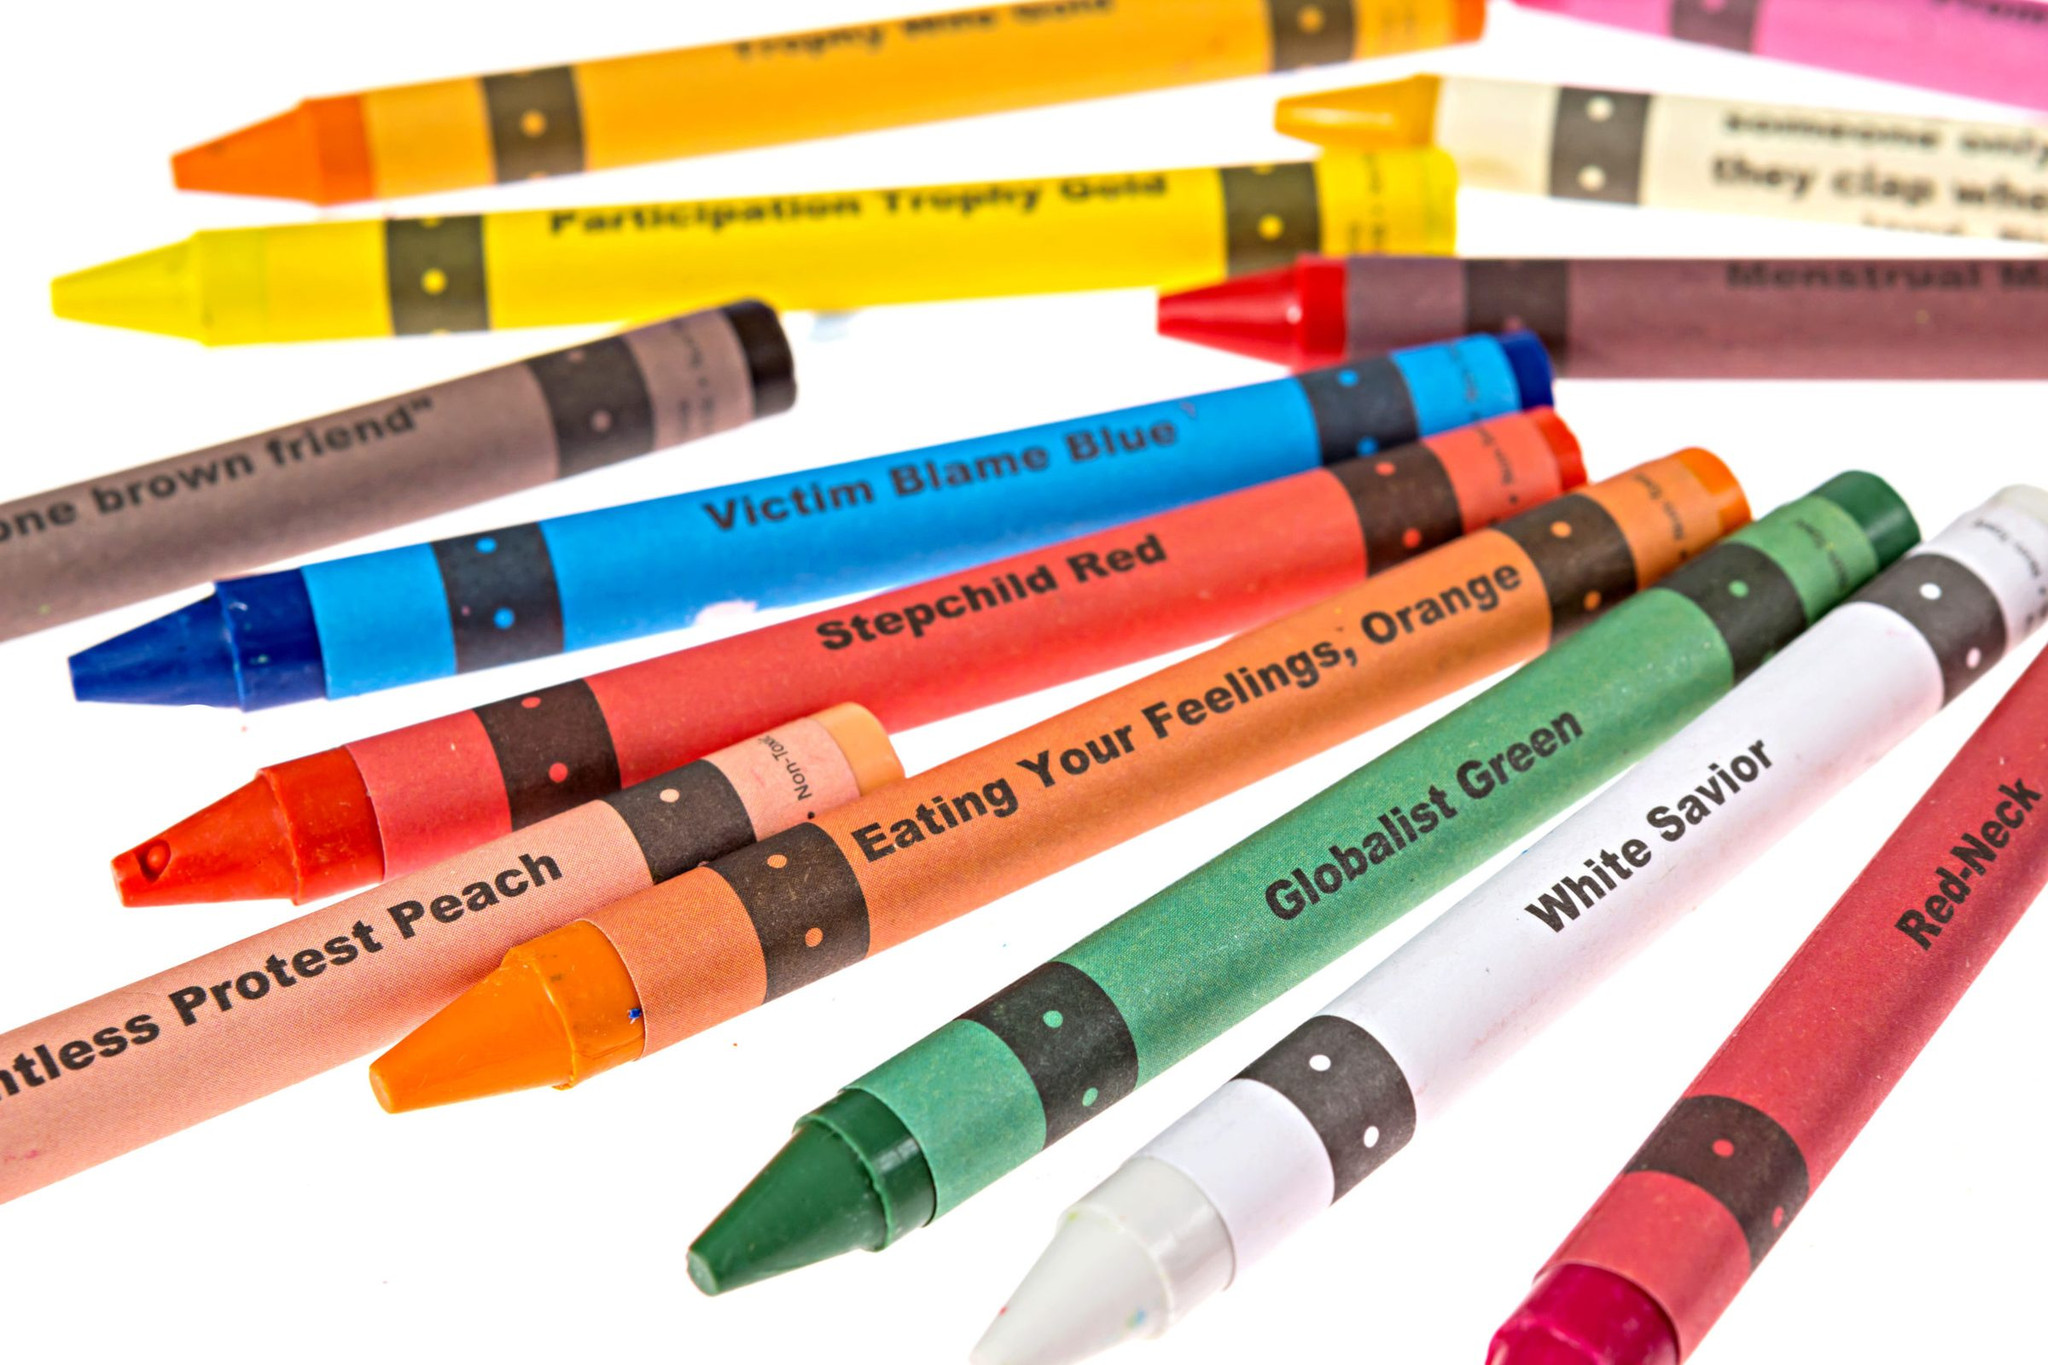 Offensive Crayons - Holiday Edition